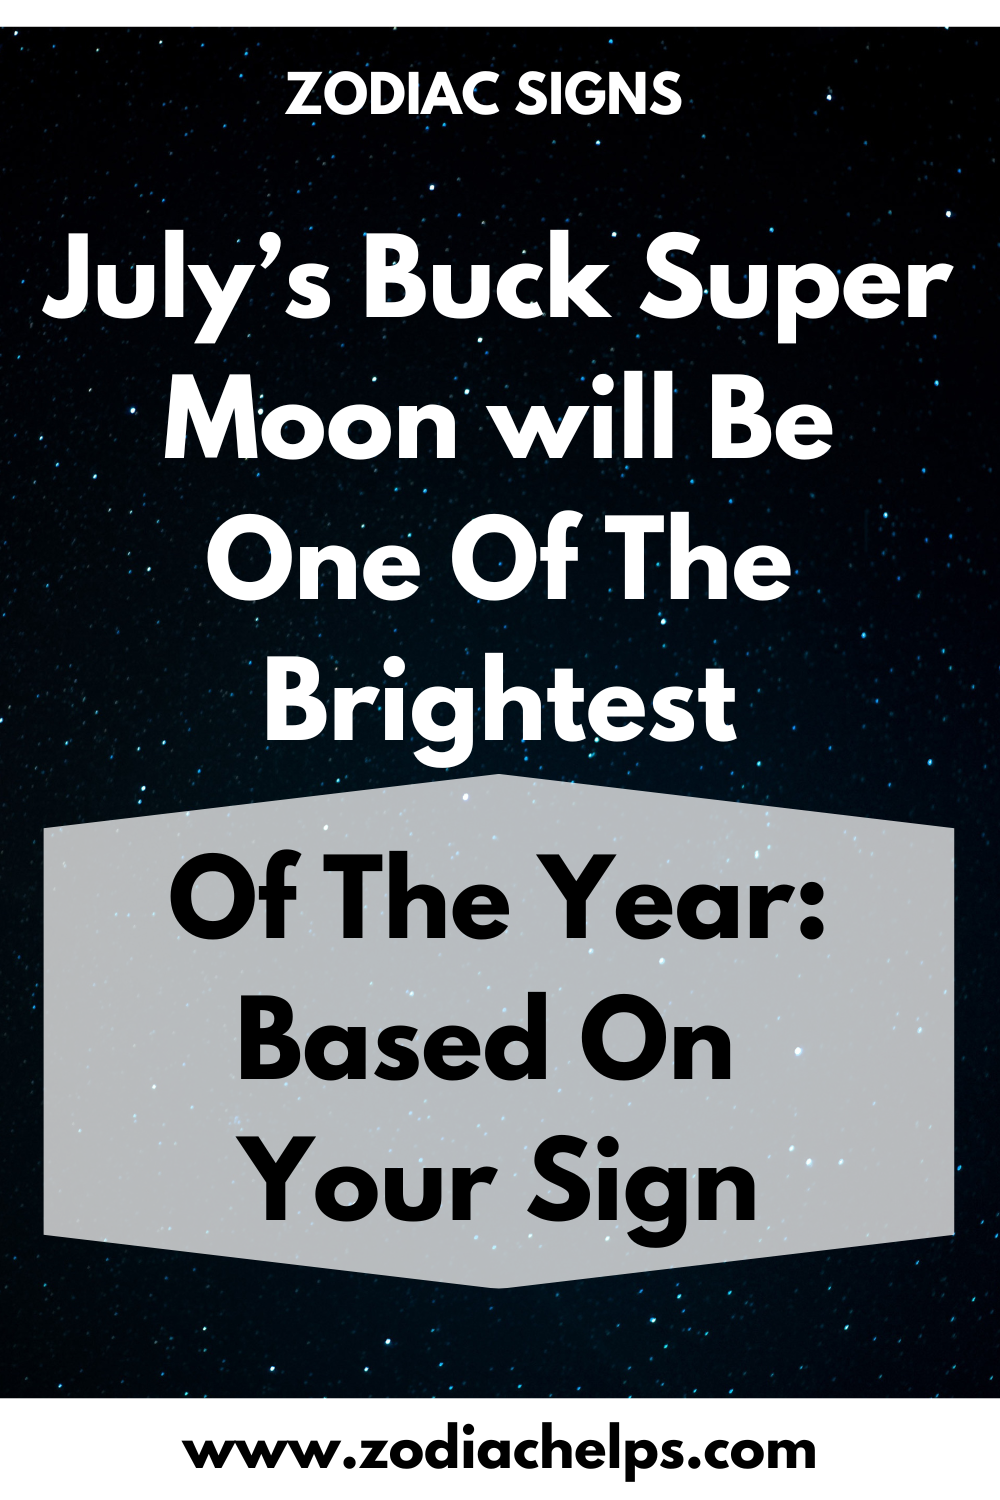 July’s Buck Super Moon \will Be One Of The Brightest Of The Year: Based On Your Sign